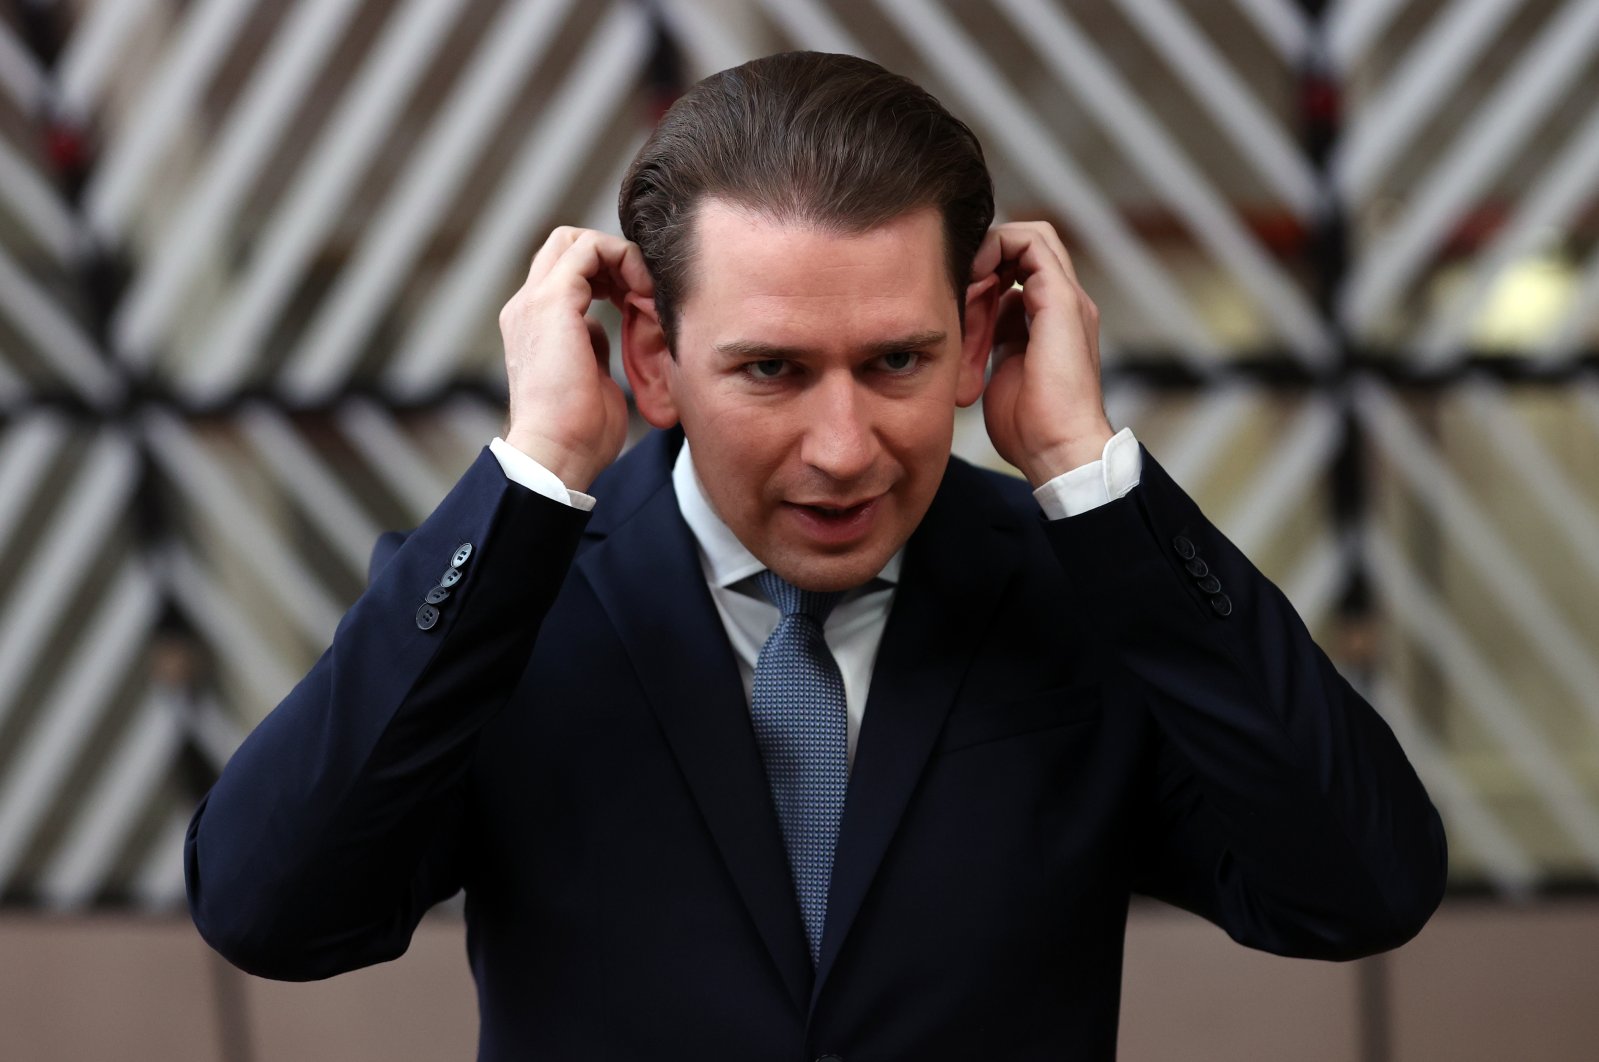 Austrian Chancellor Sebastian Kurz arrives on the second day of the EU summit at the European Council building in Brussels on May 25, 2021. (AA Photo)